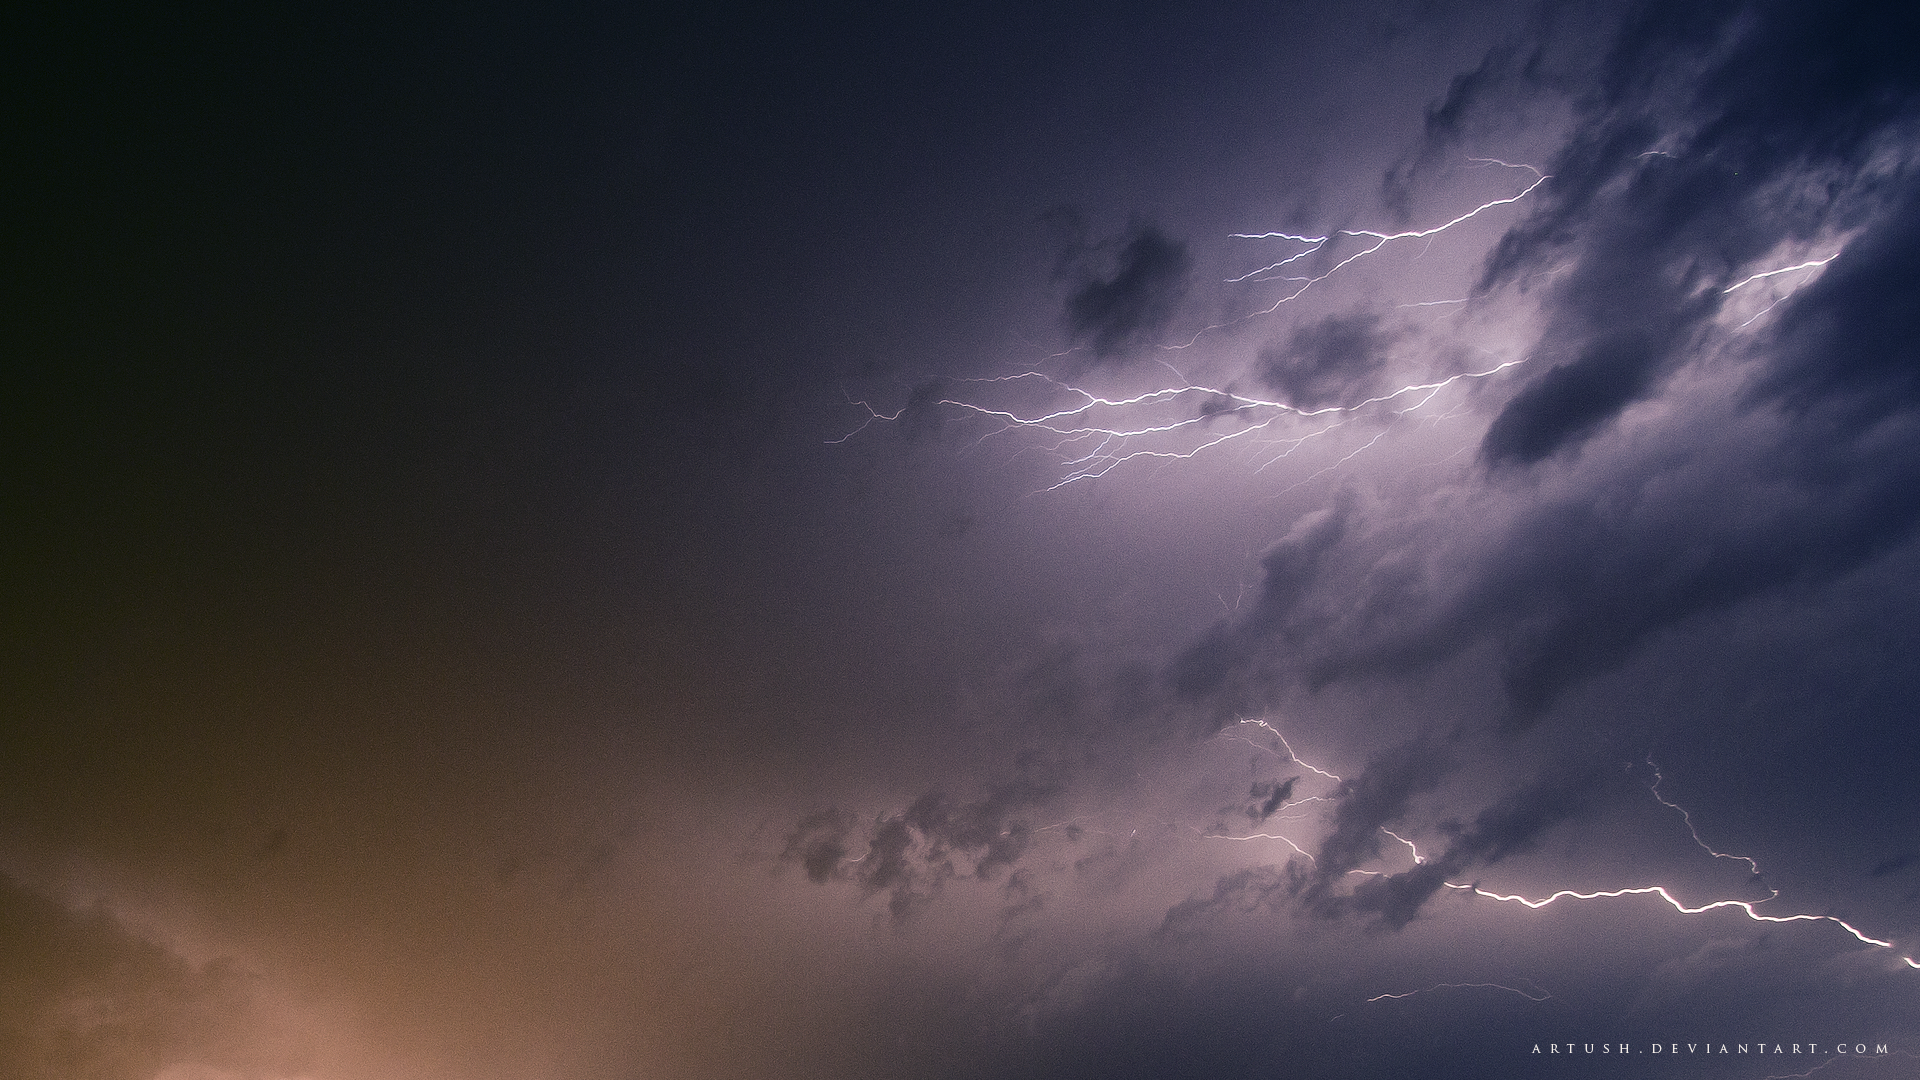 Thunder Background Images, HD Pictures and Wallpaper For Free